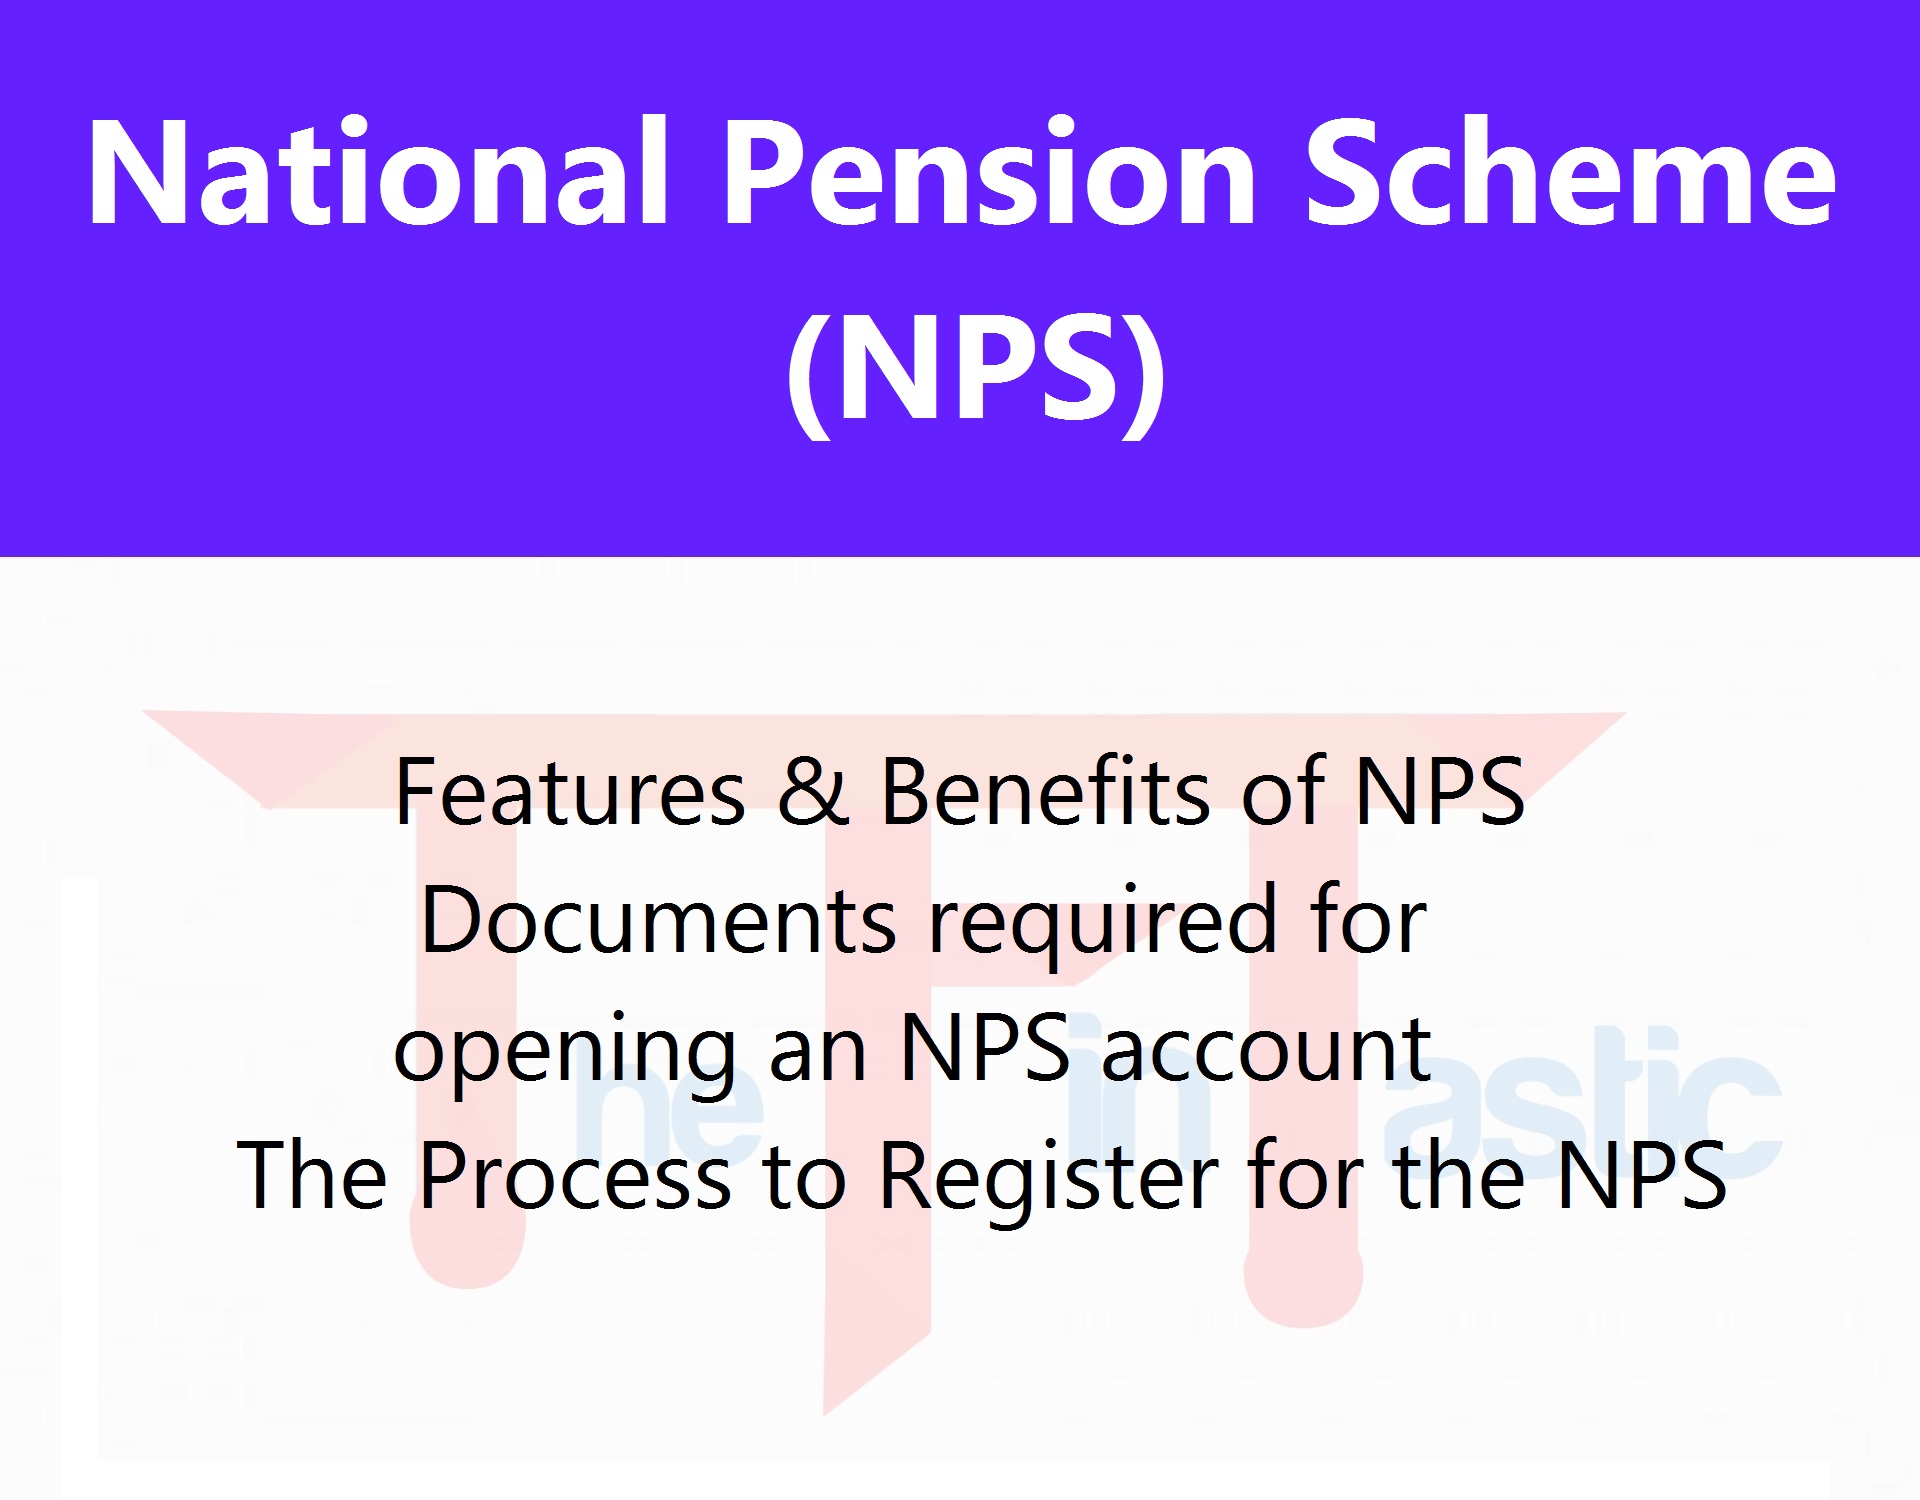 National Pension Scheme (NPS) - Features, Benefits and Process of opening an NPS account